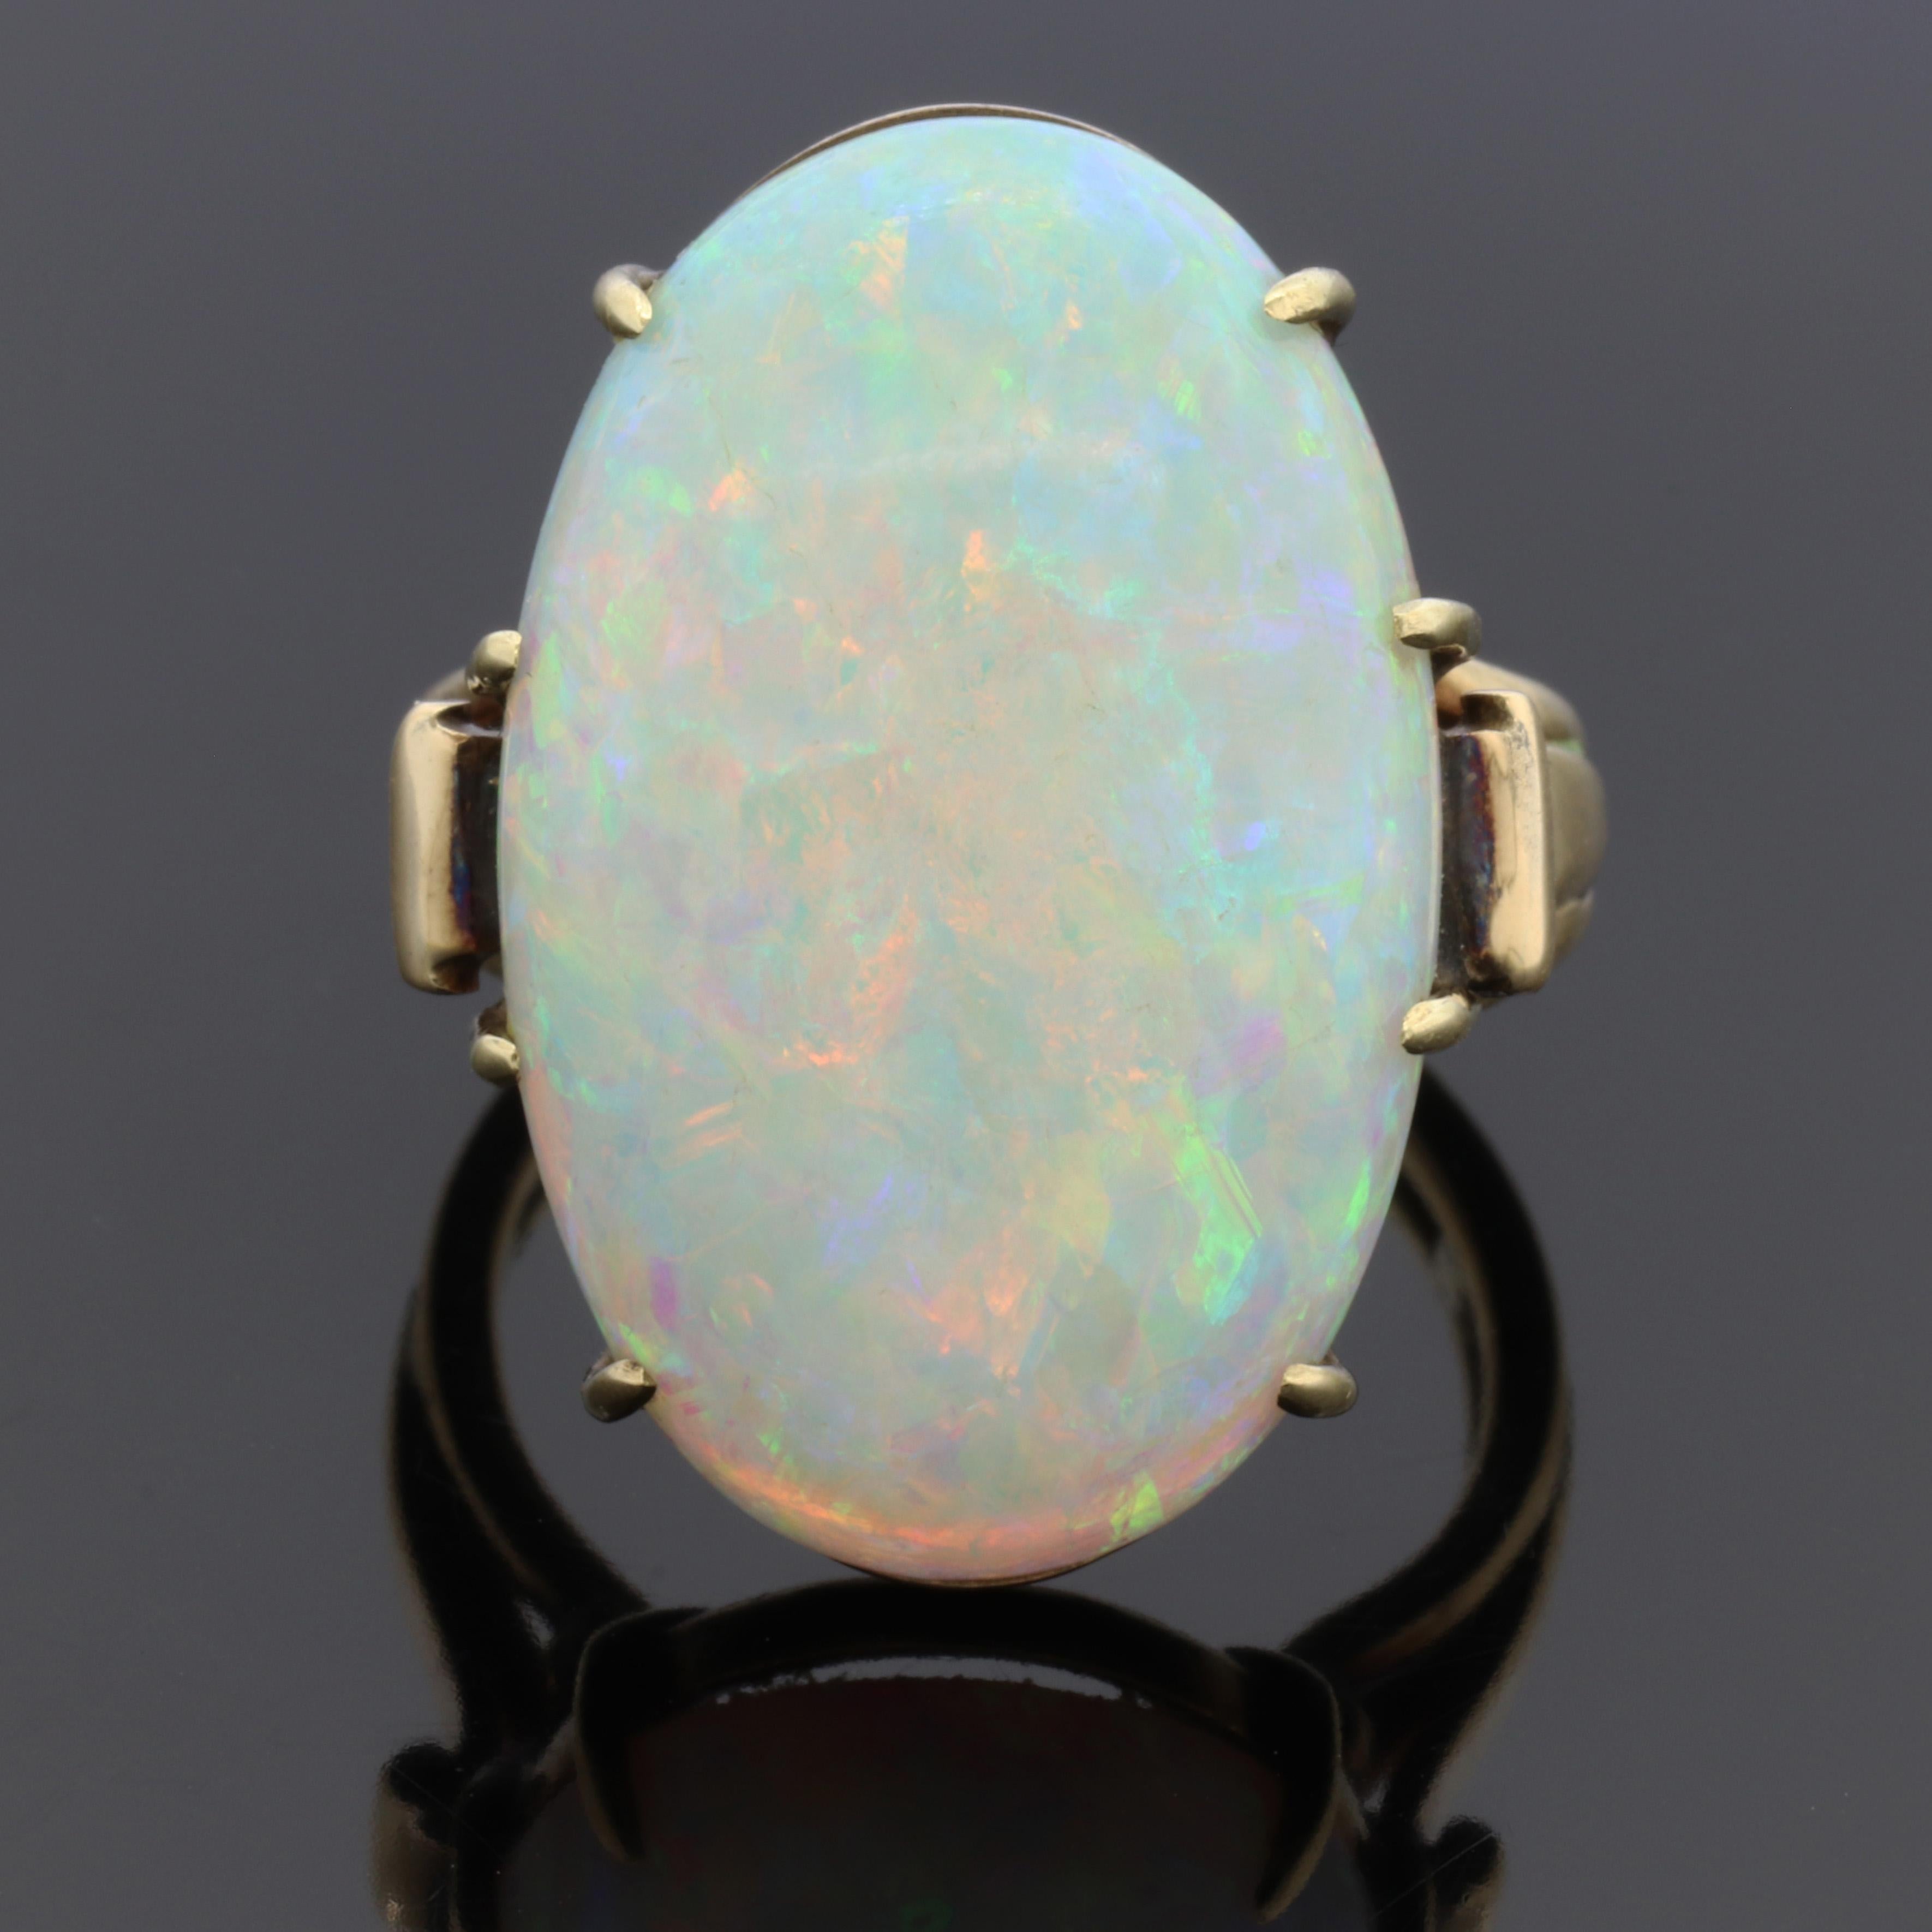 This is a fabulous old opal ring is really a showstopper in person, it is one of those Opals that has bold eye catching presence when worn and is a sea of green and pink fire. 
Pictures do not do this piece justice.
This is not a doublet or a